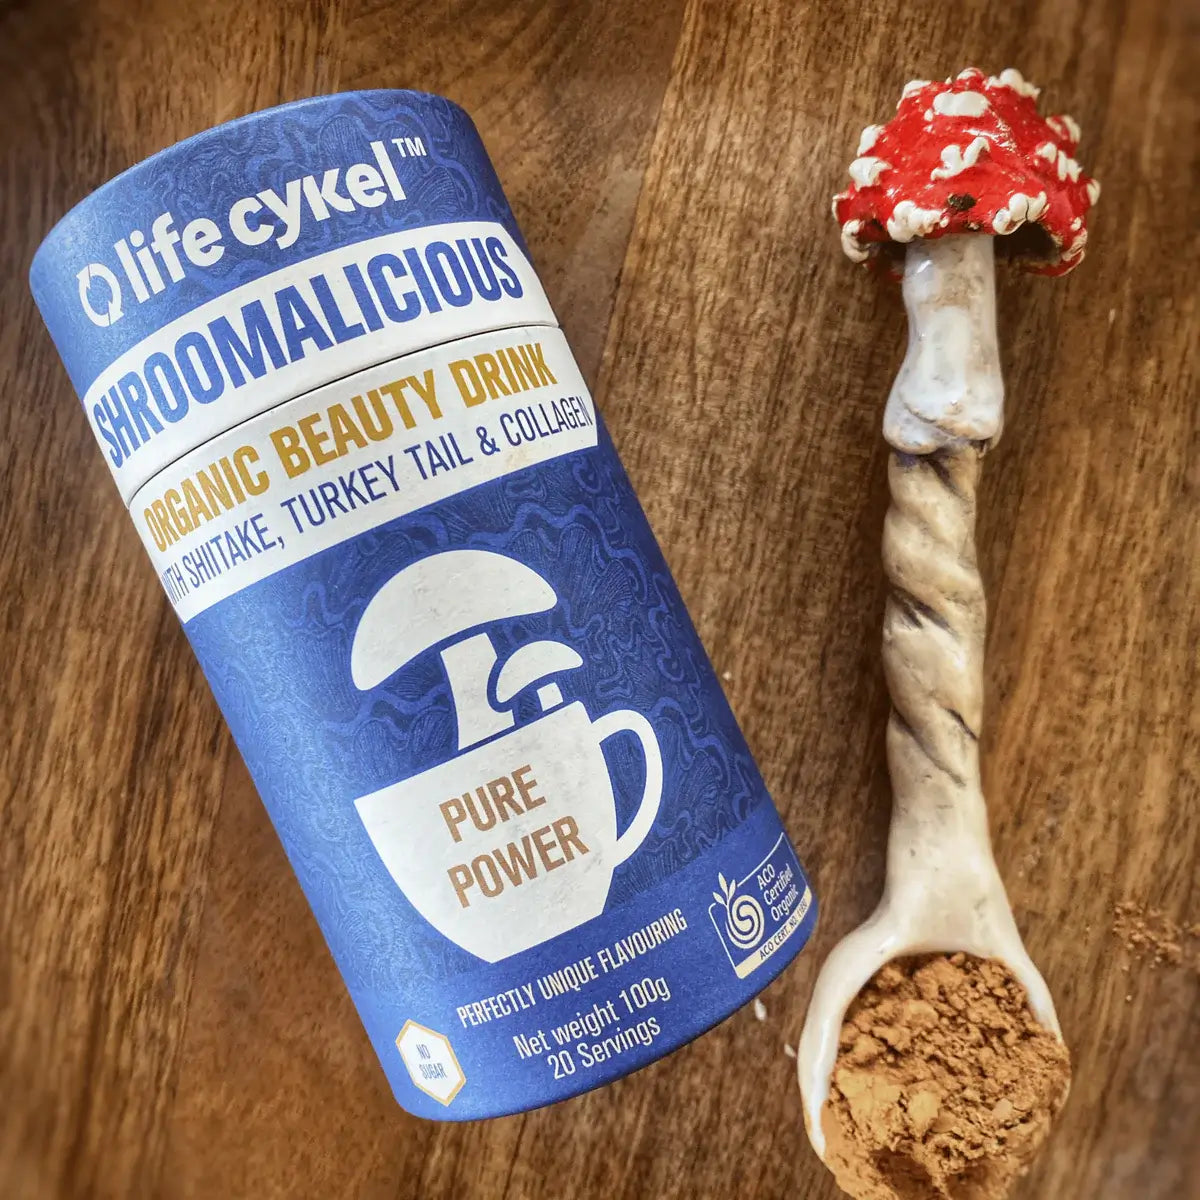 Shroomalicious Organic Beauty Drink with Shiitake, Turkey Tail and Collagen